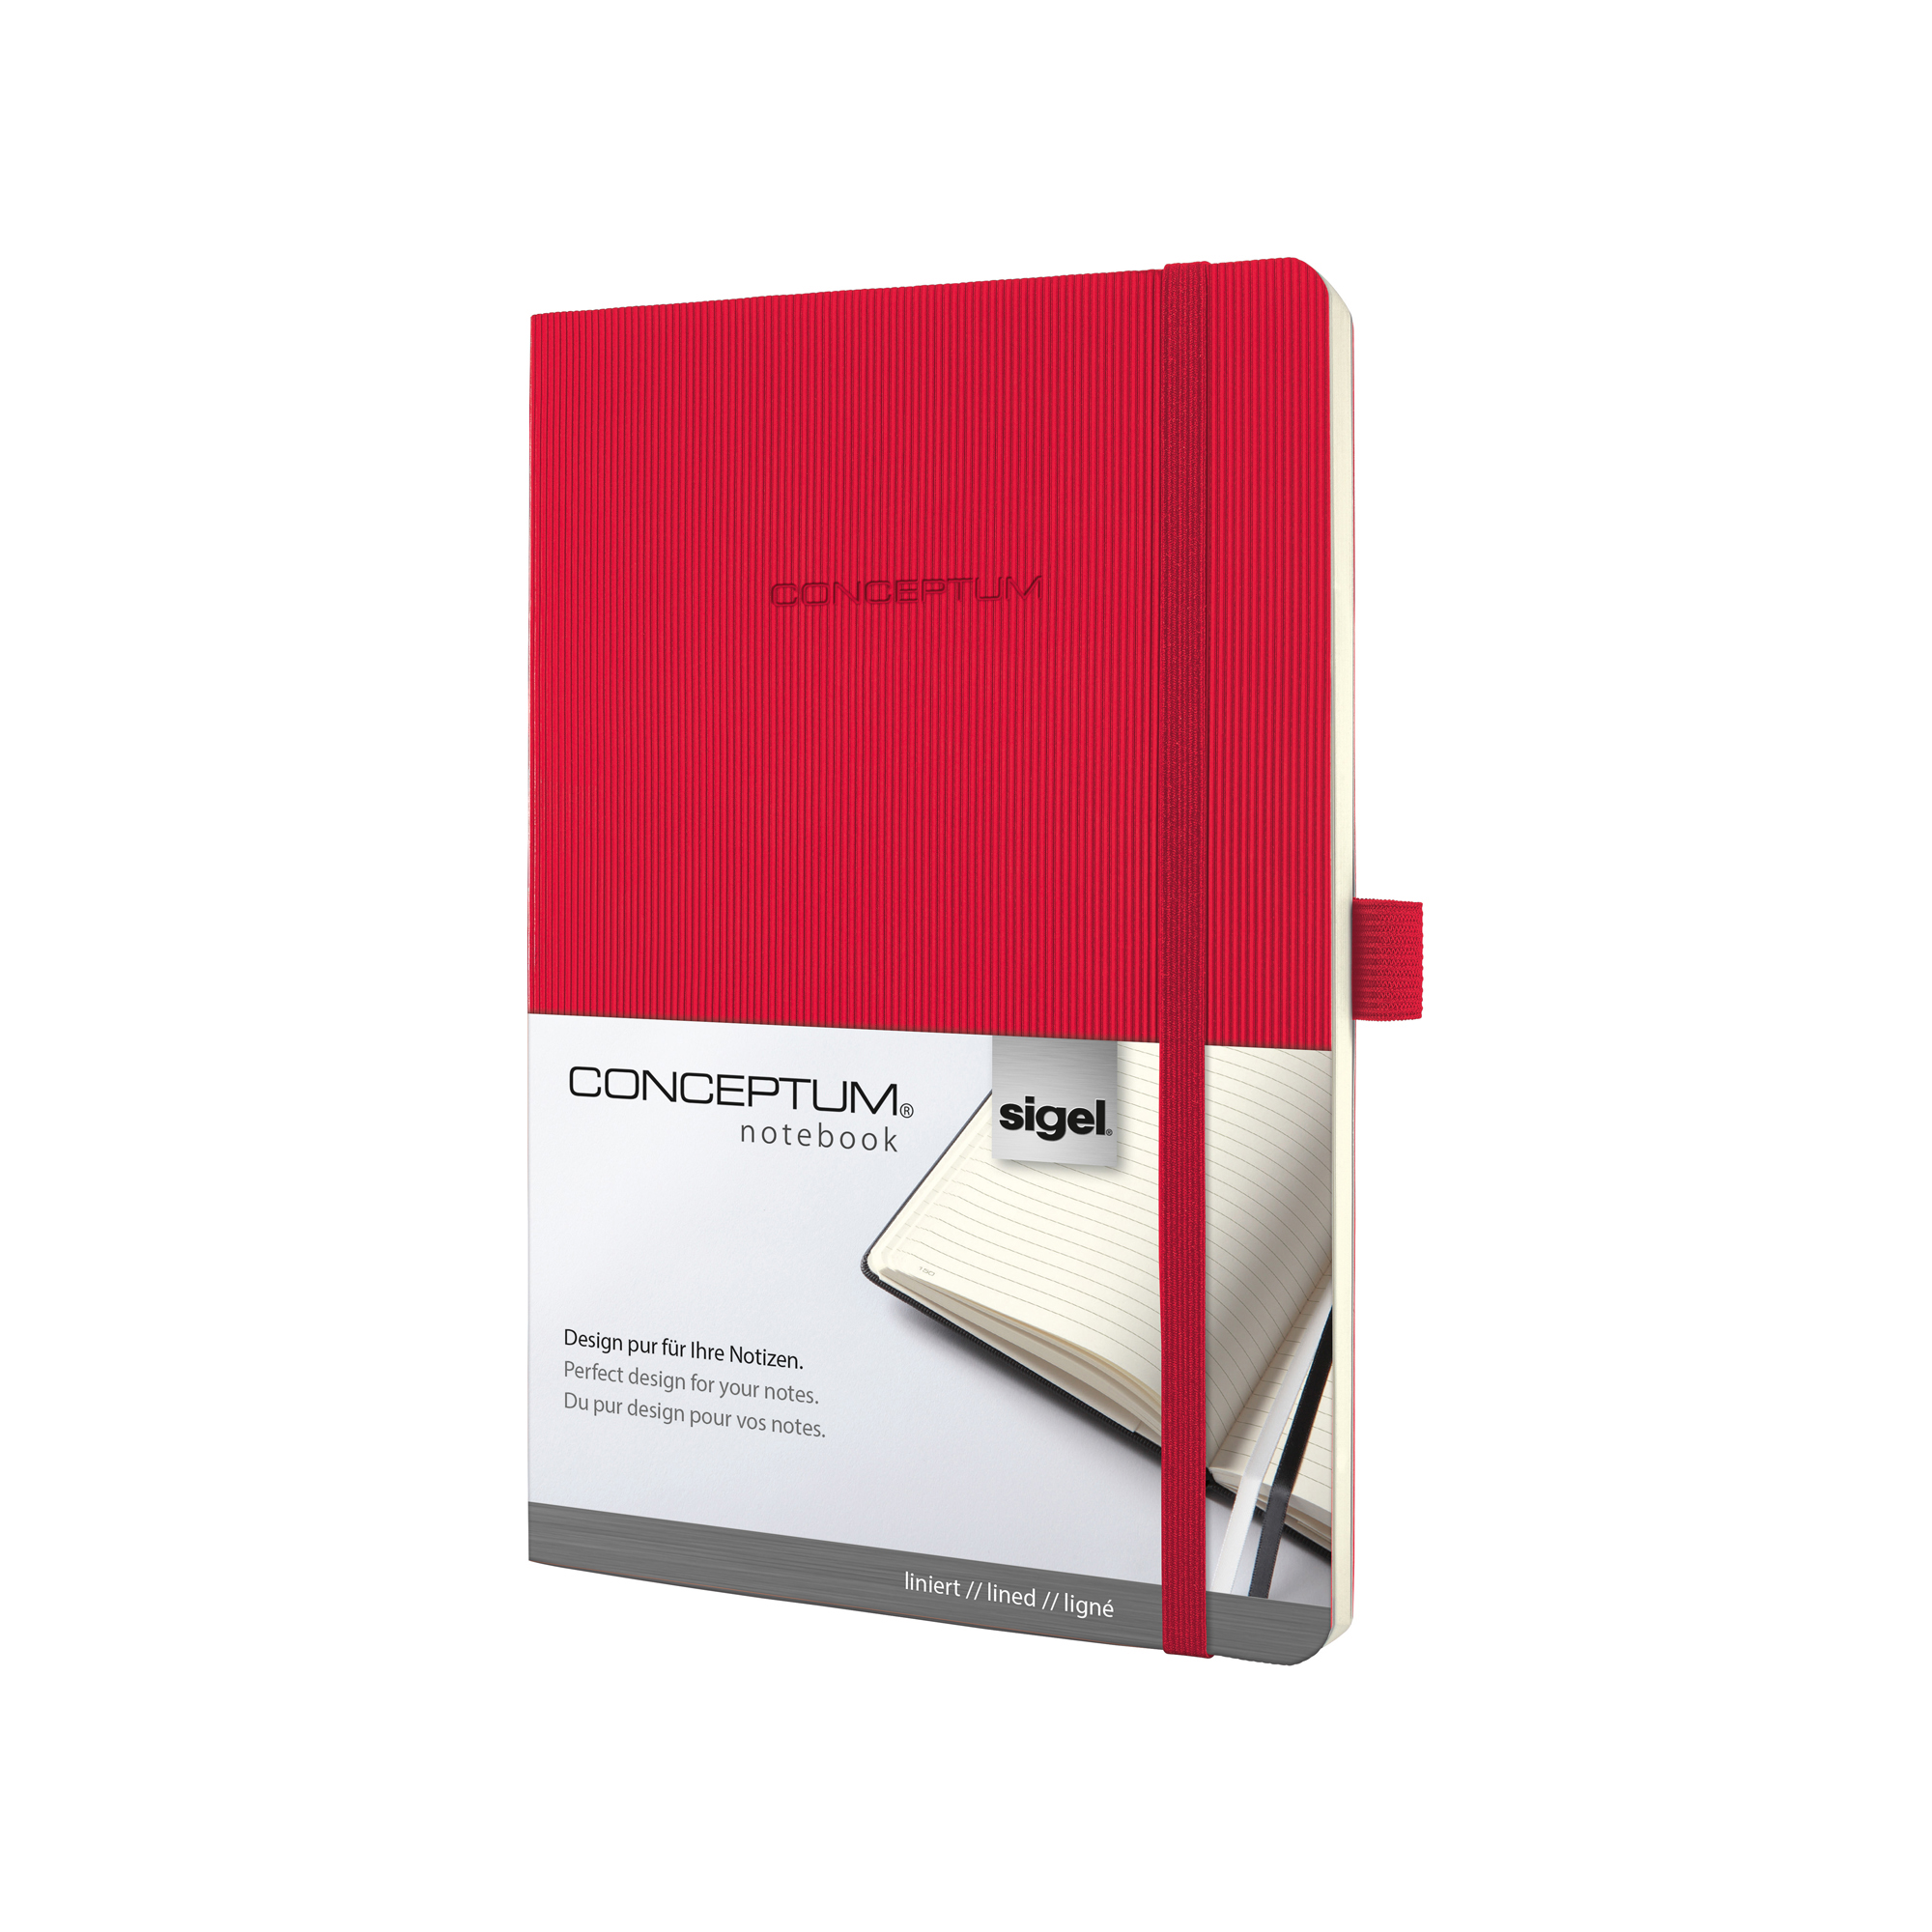 Taccuino A5 a Righe Rosso 194pag Softcover Softwave Conceptum pure Sigel